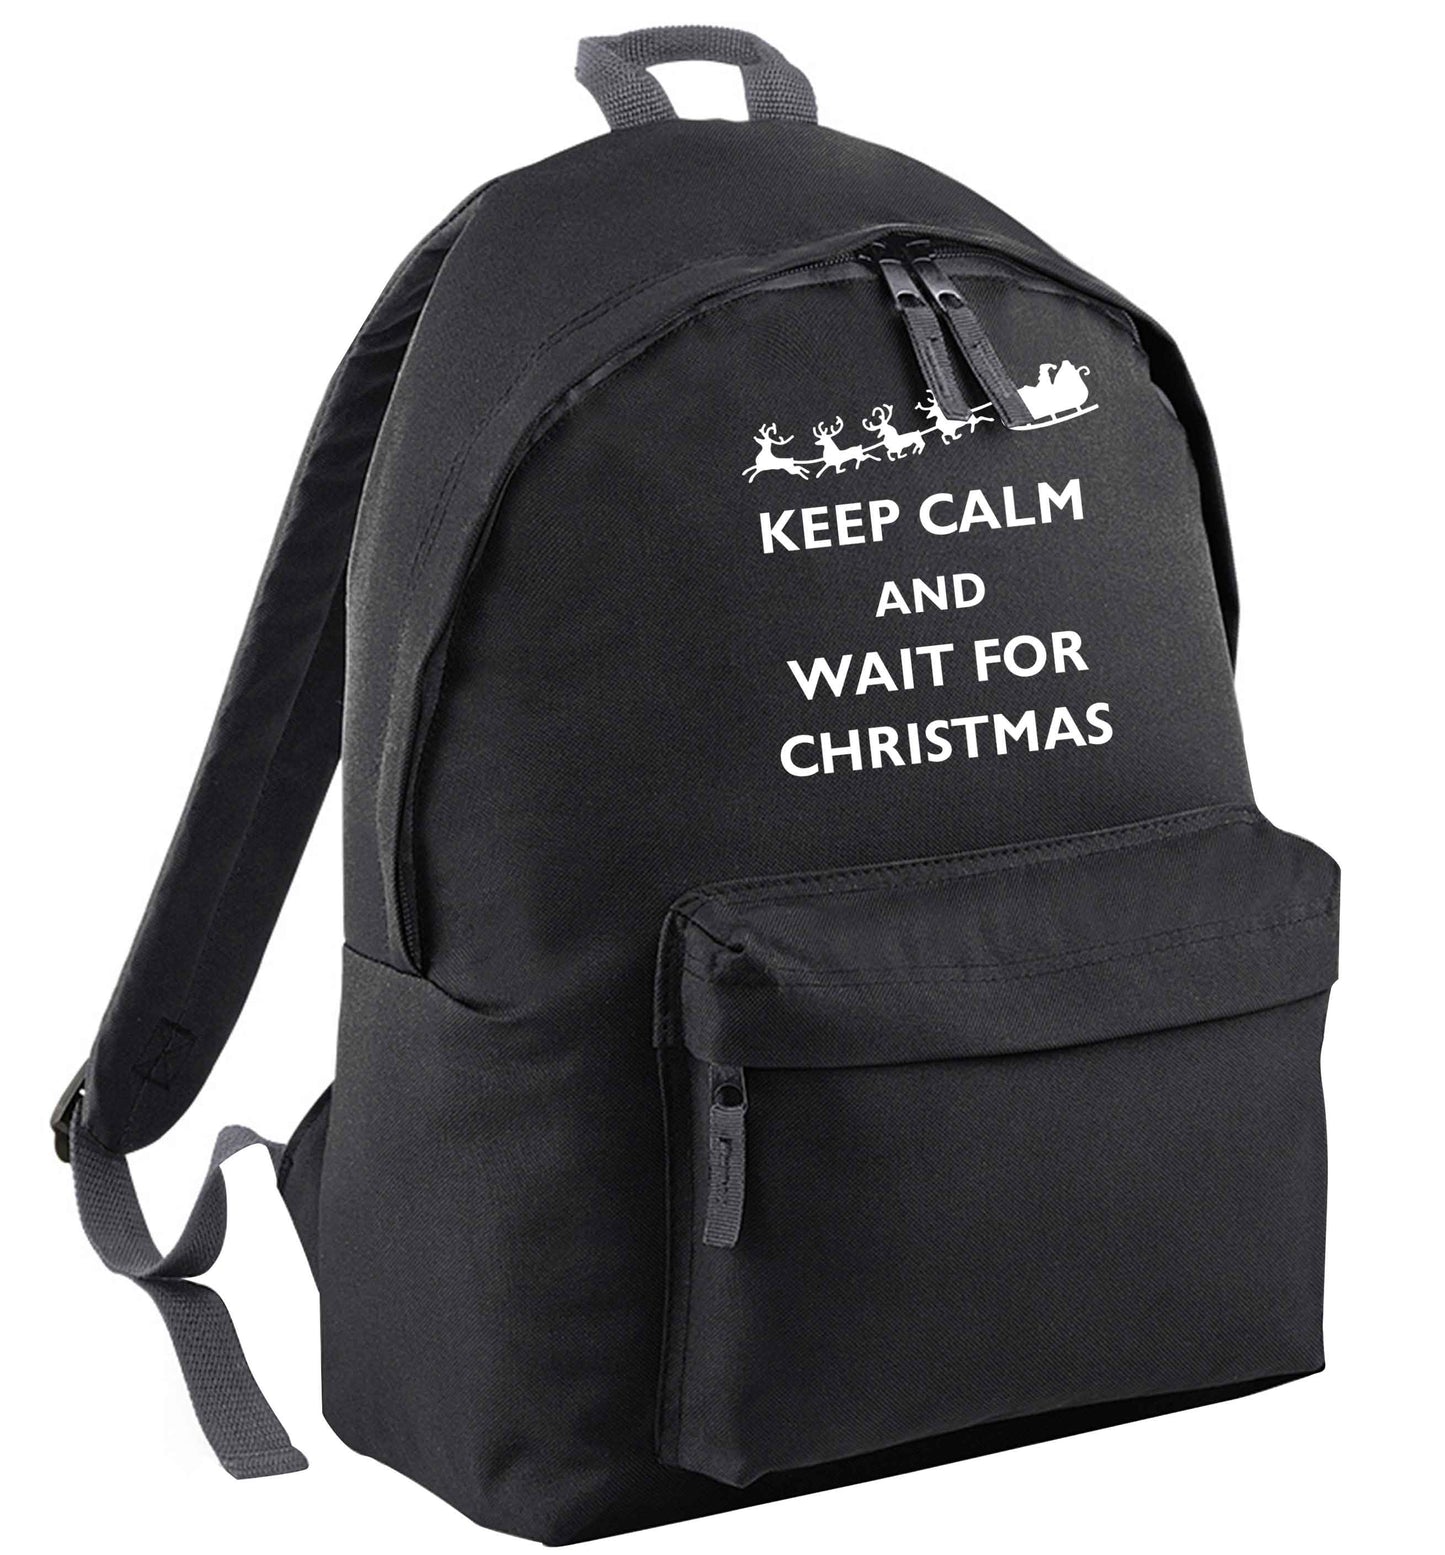 Keep calm and wait for Christmas black adults backpack